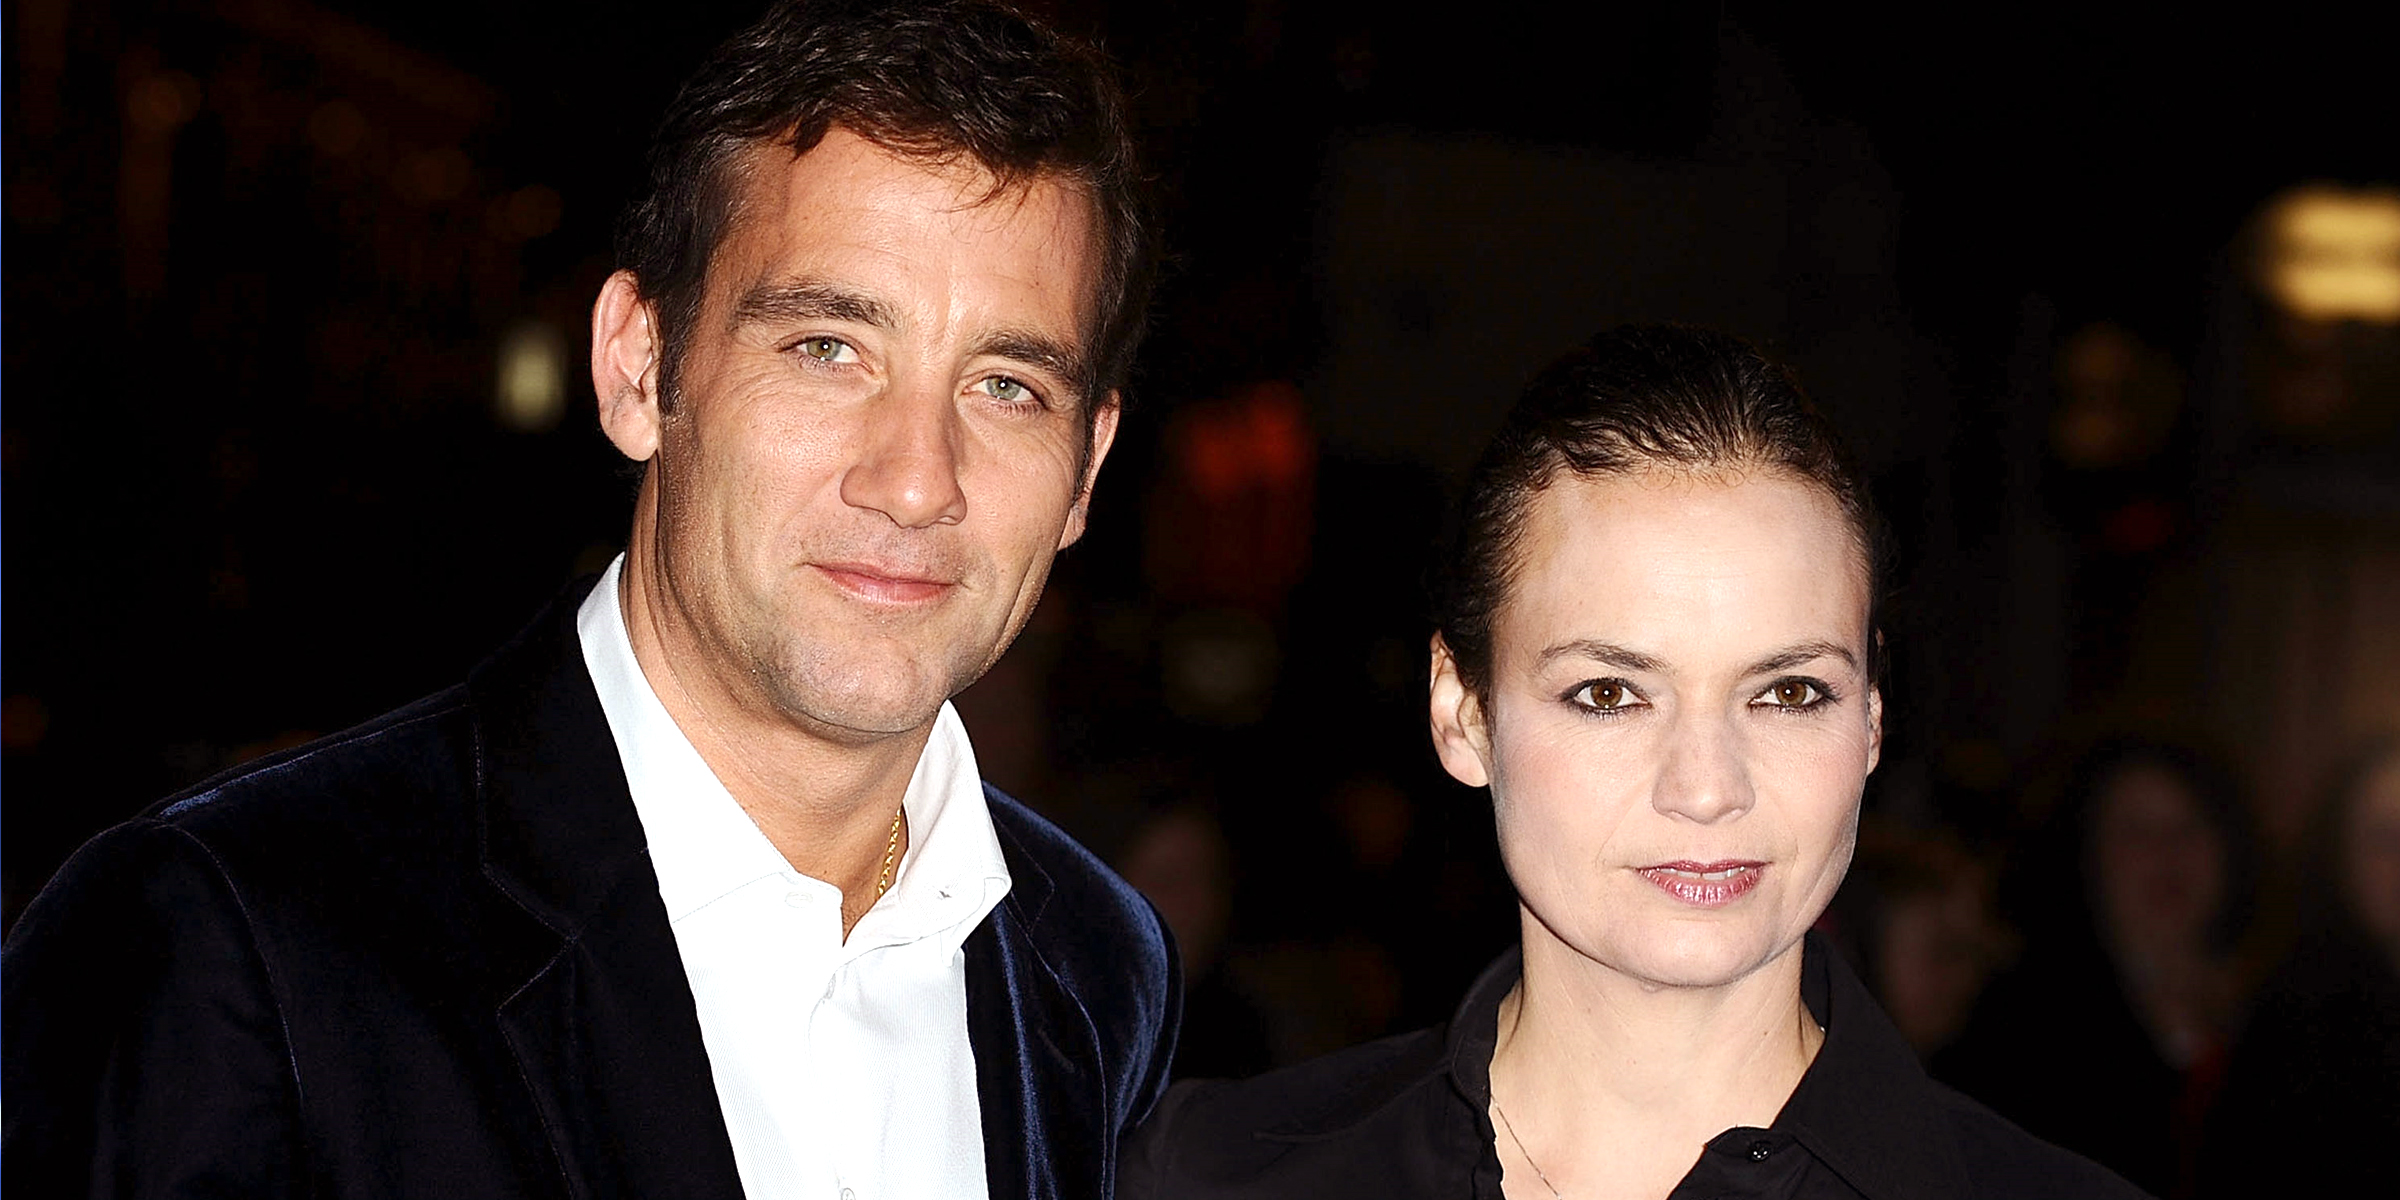 Clive Owen and Sarah-Jane Fenton | Source: Getty Images